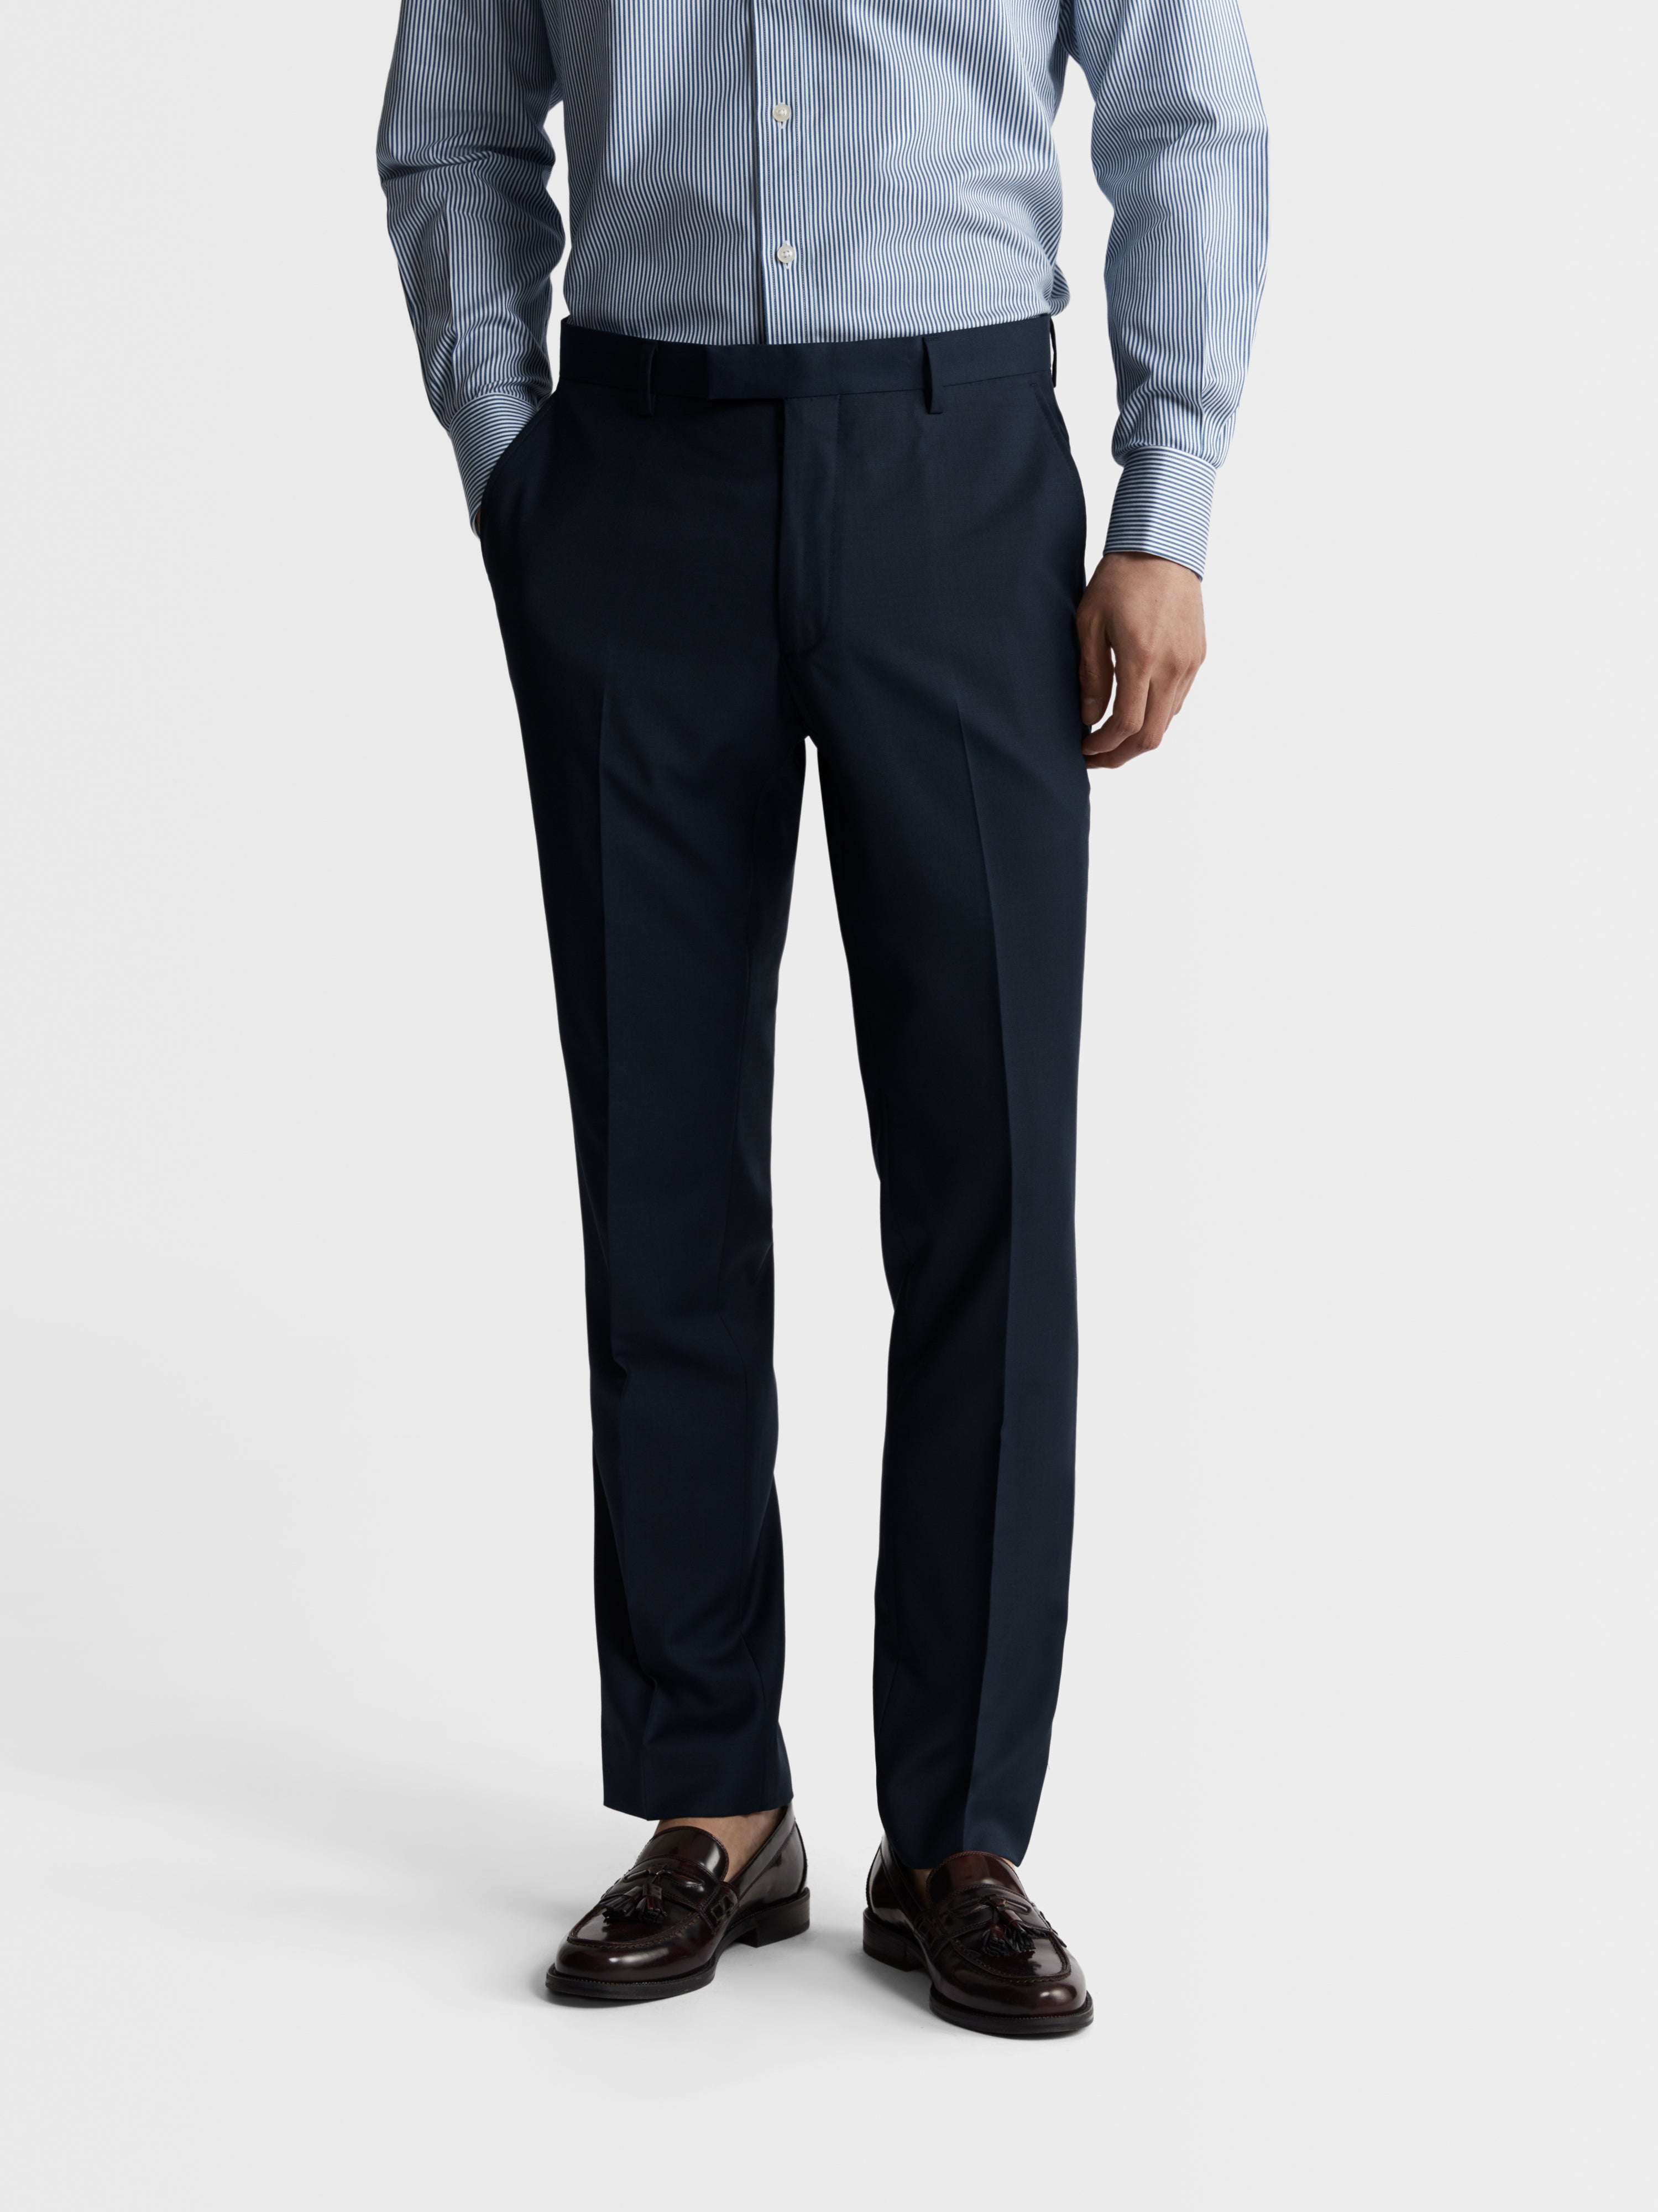 Navy Tweed Check Trousers | Mens Smart Blue Suit Trouser – Threadpepper